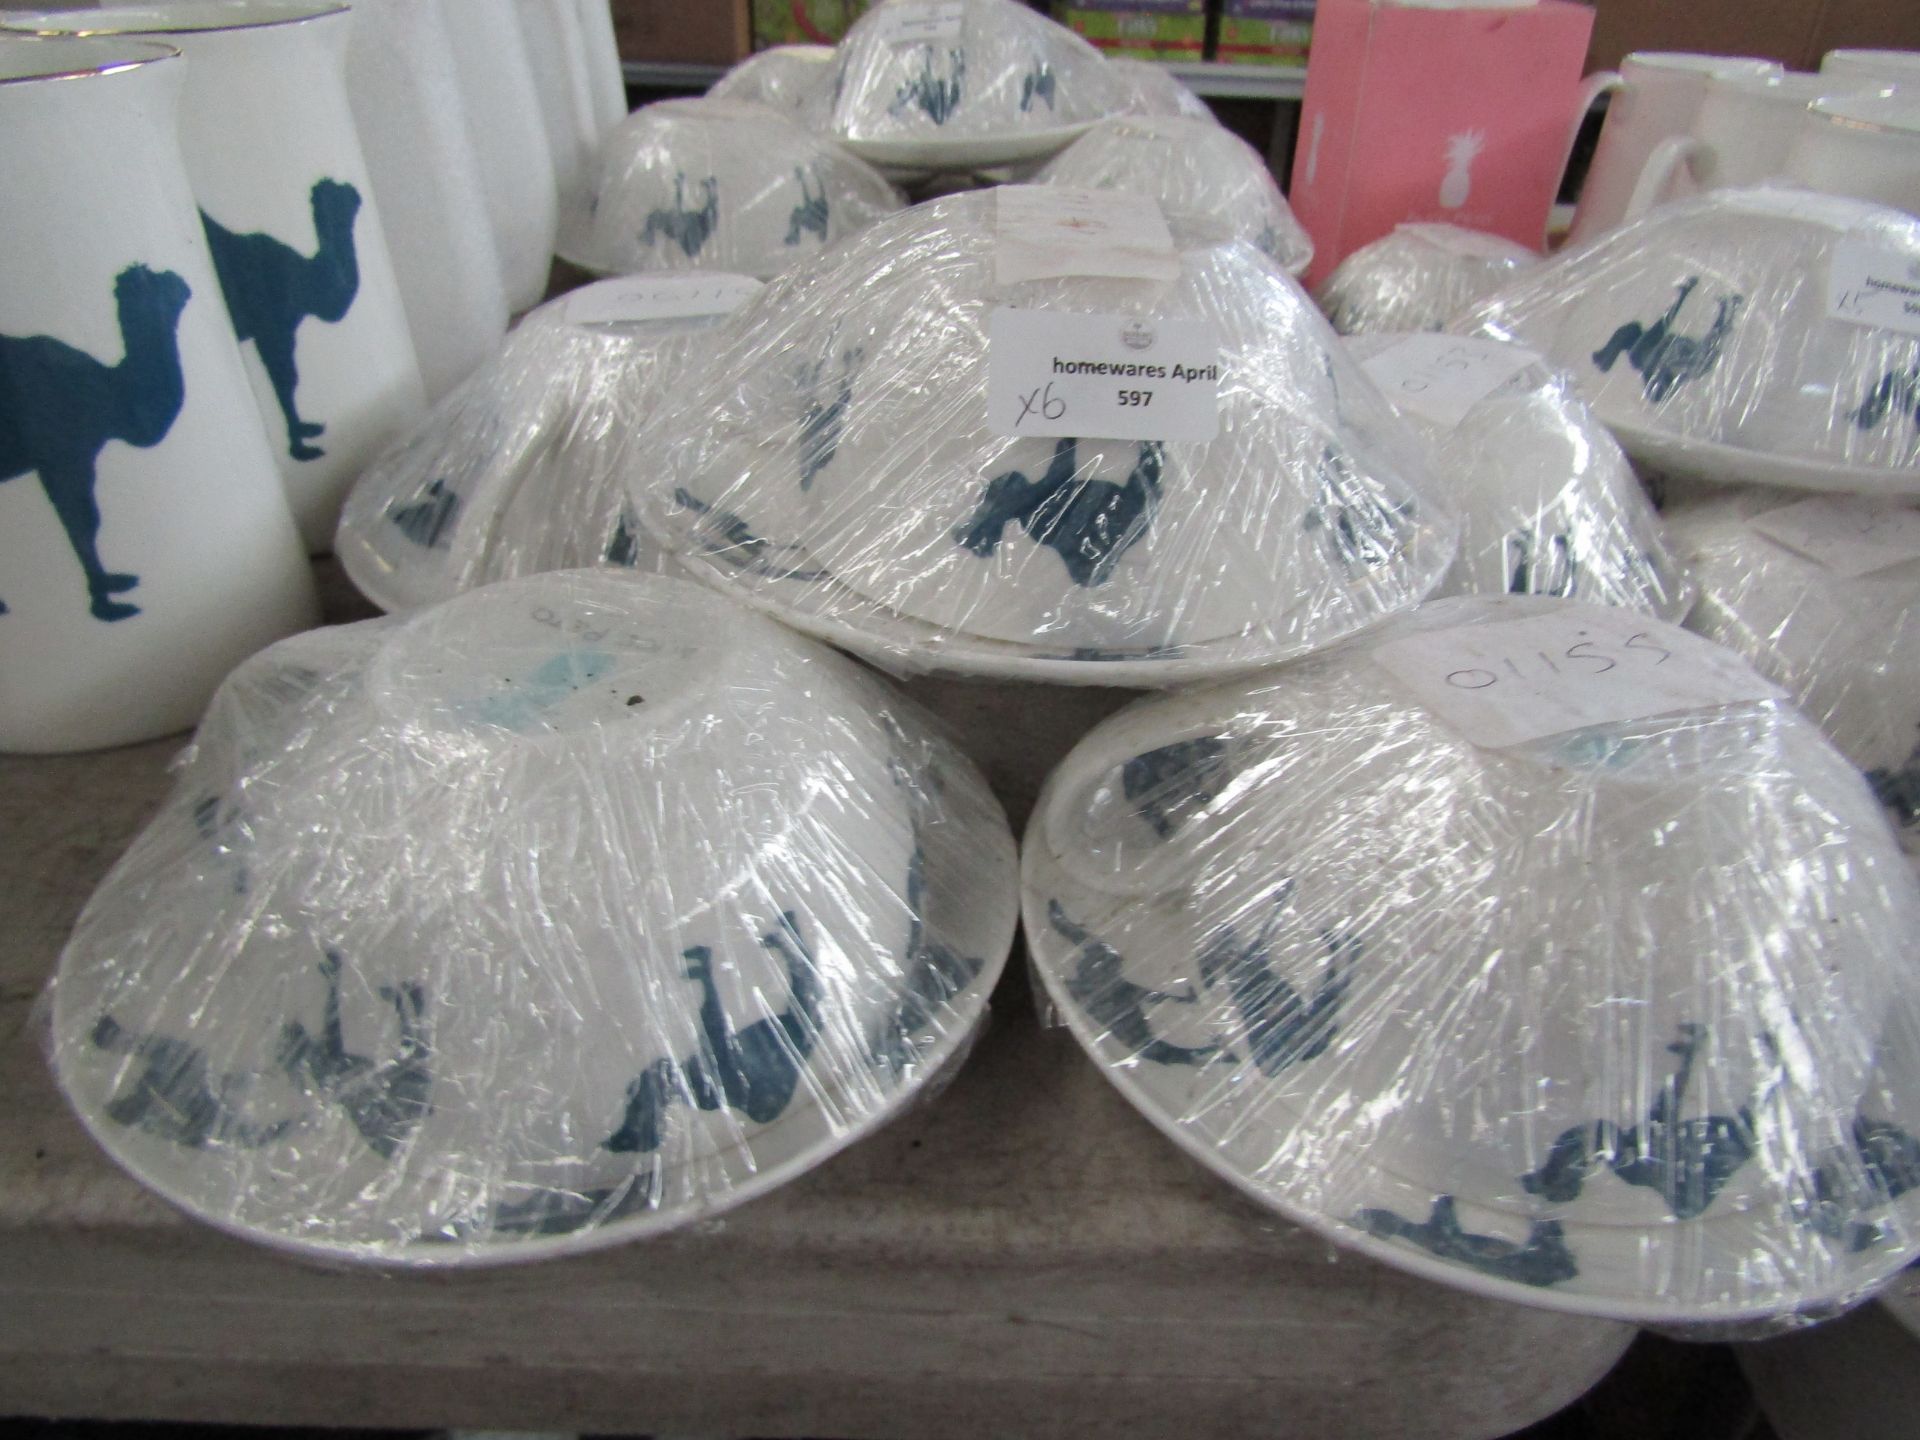 Mixed Lot of 6 x Homeware Outlet Customer Returns for Repair or Upcycling - Total RRP approx